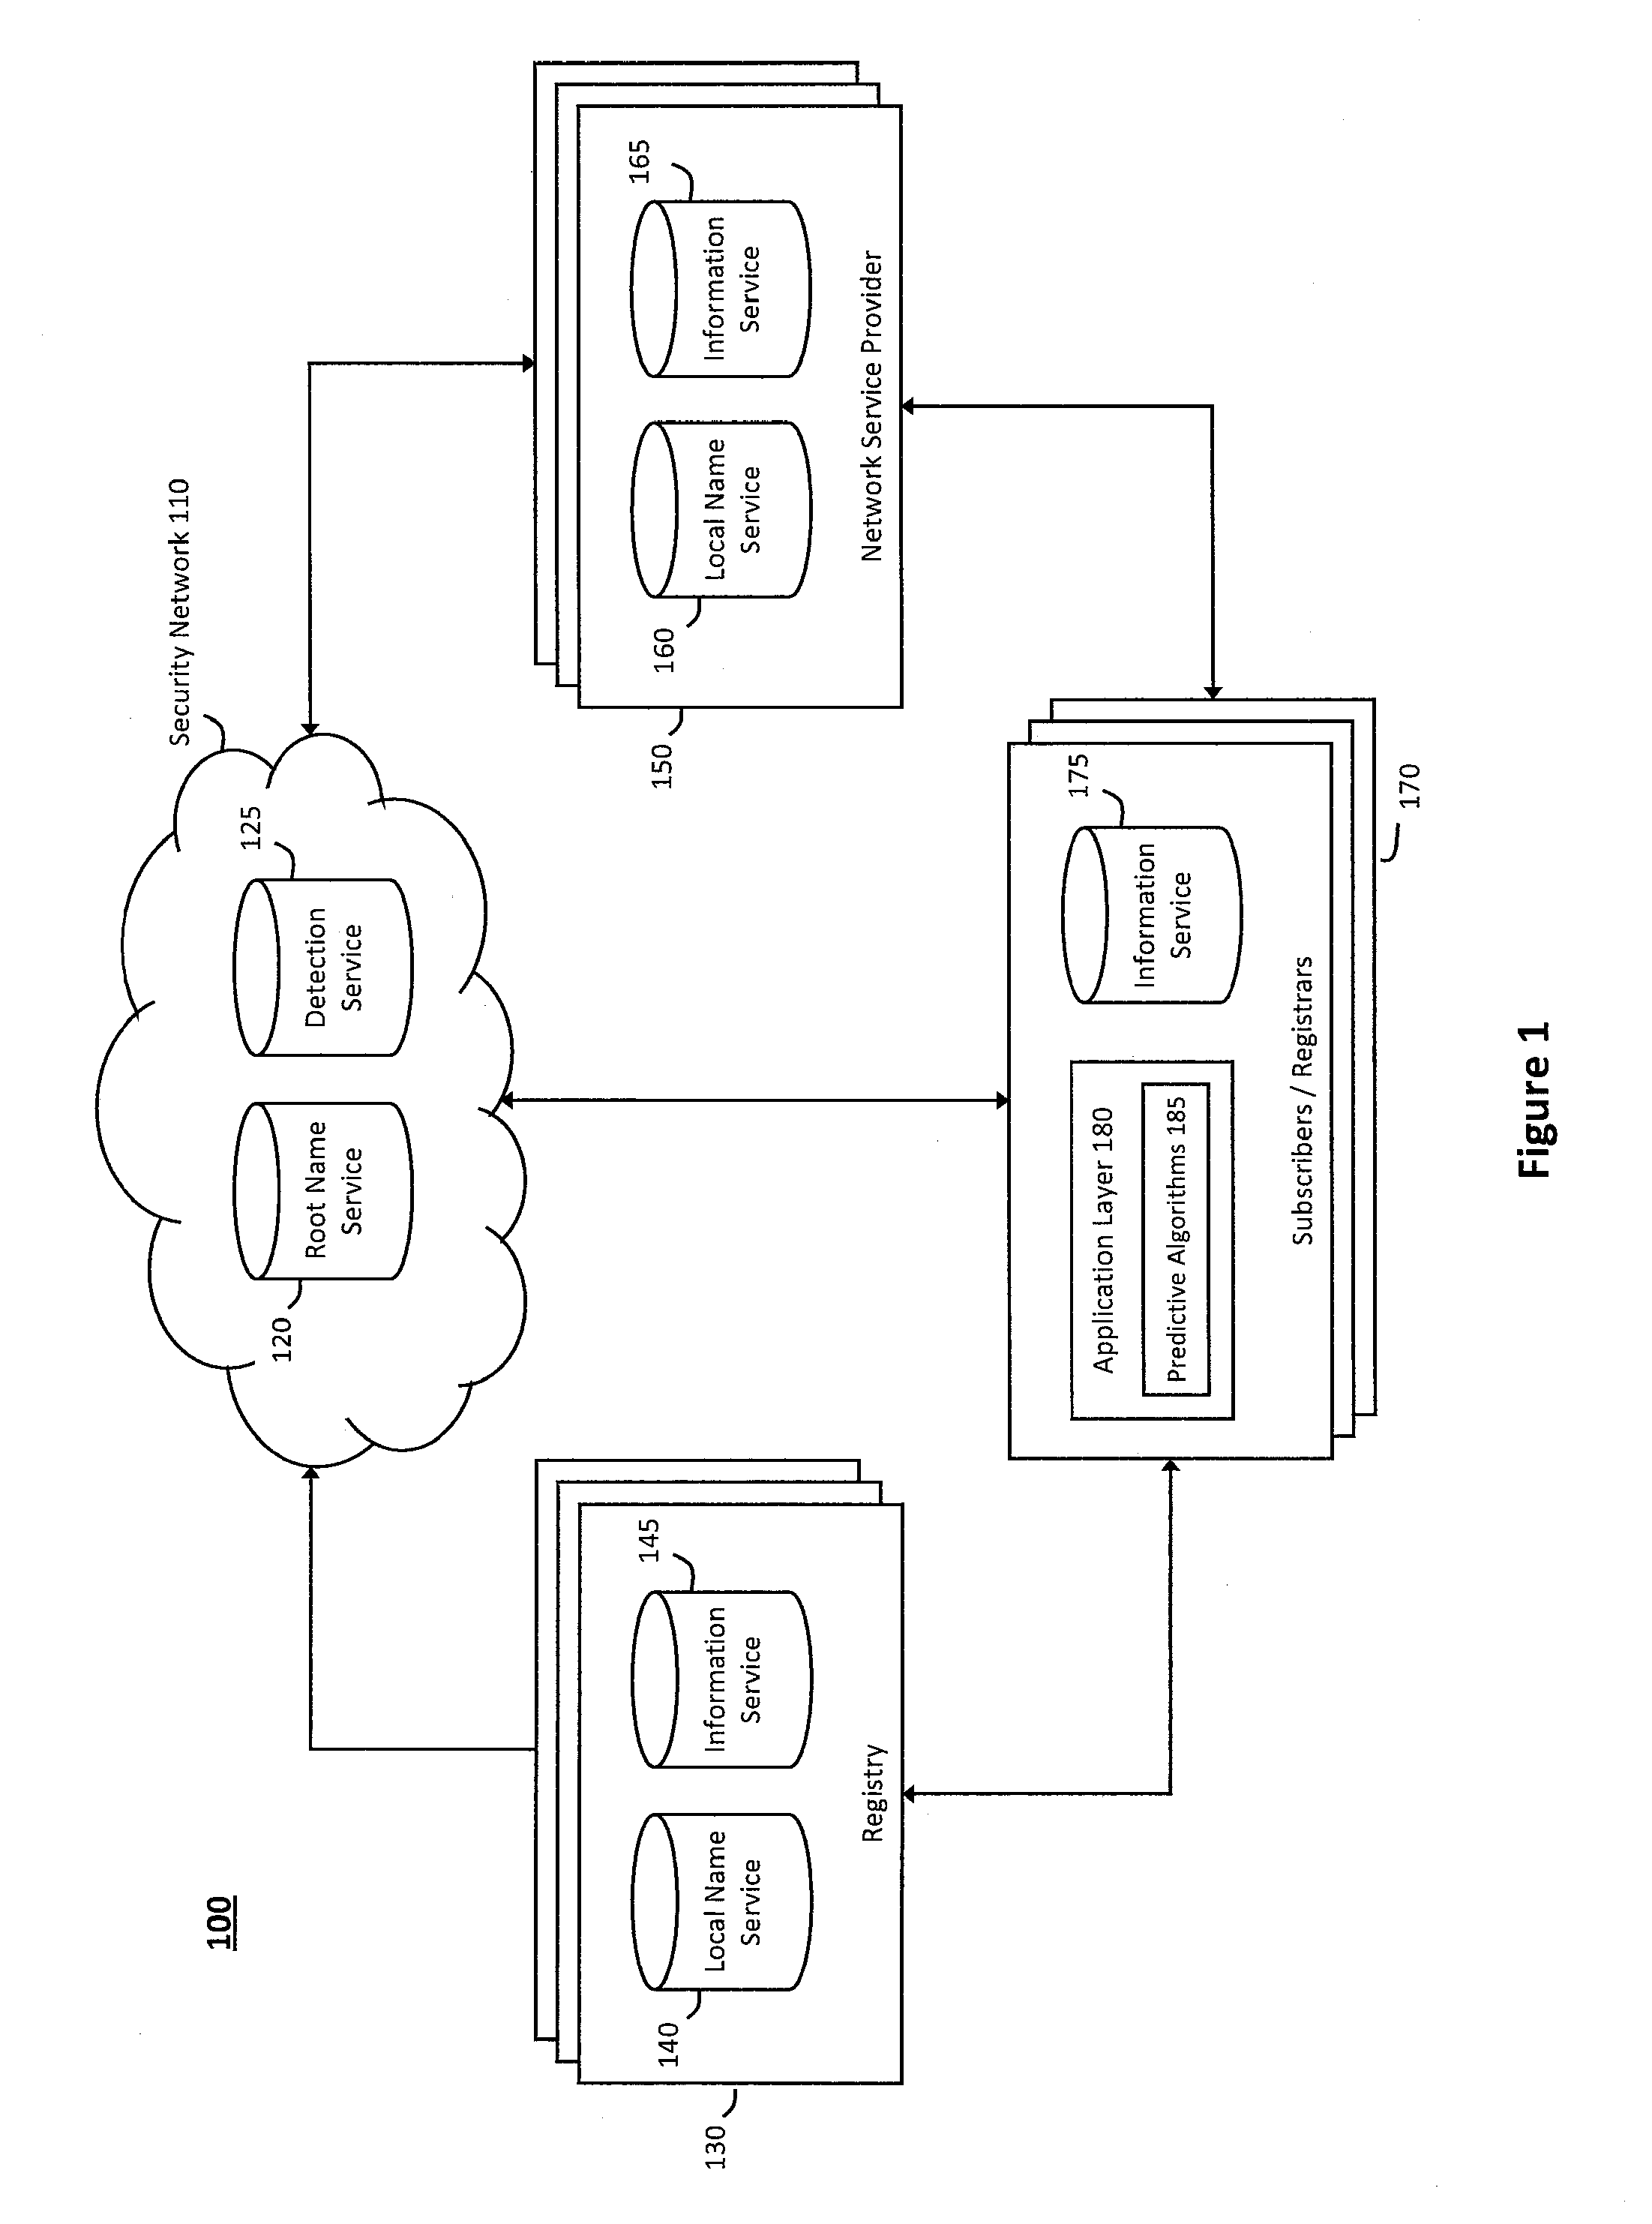 Storing and accessing threat information for use in predictive modeling in a network security service